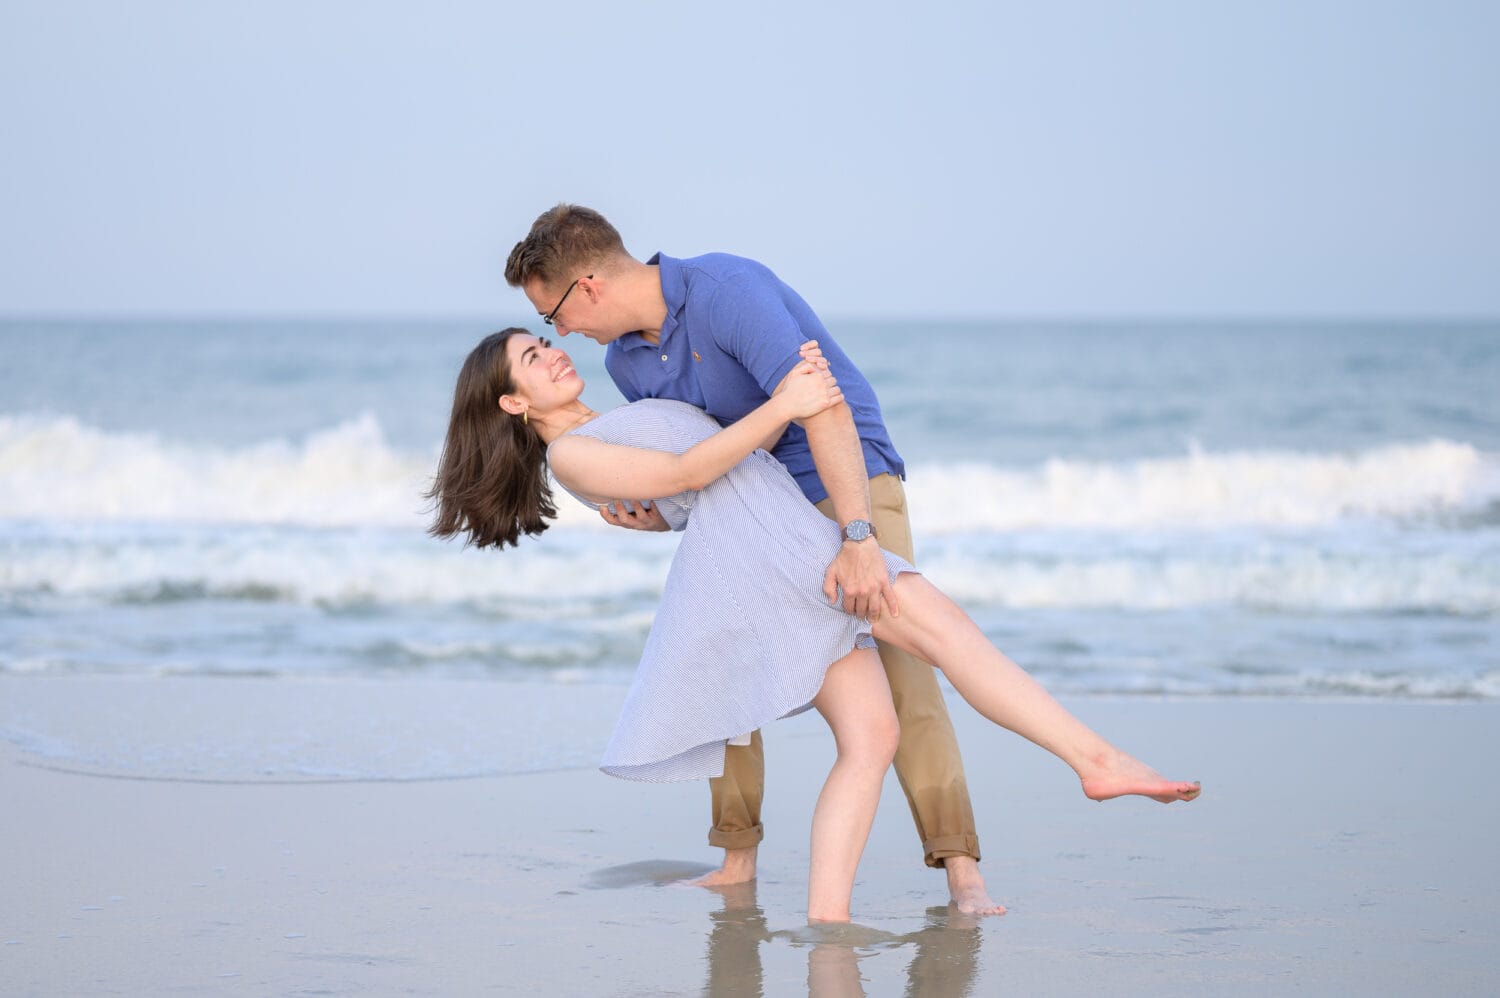 Summer surprise proposal with a beautiful sunset by the ocean - Huntington Beach State Park